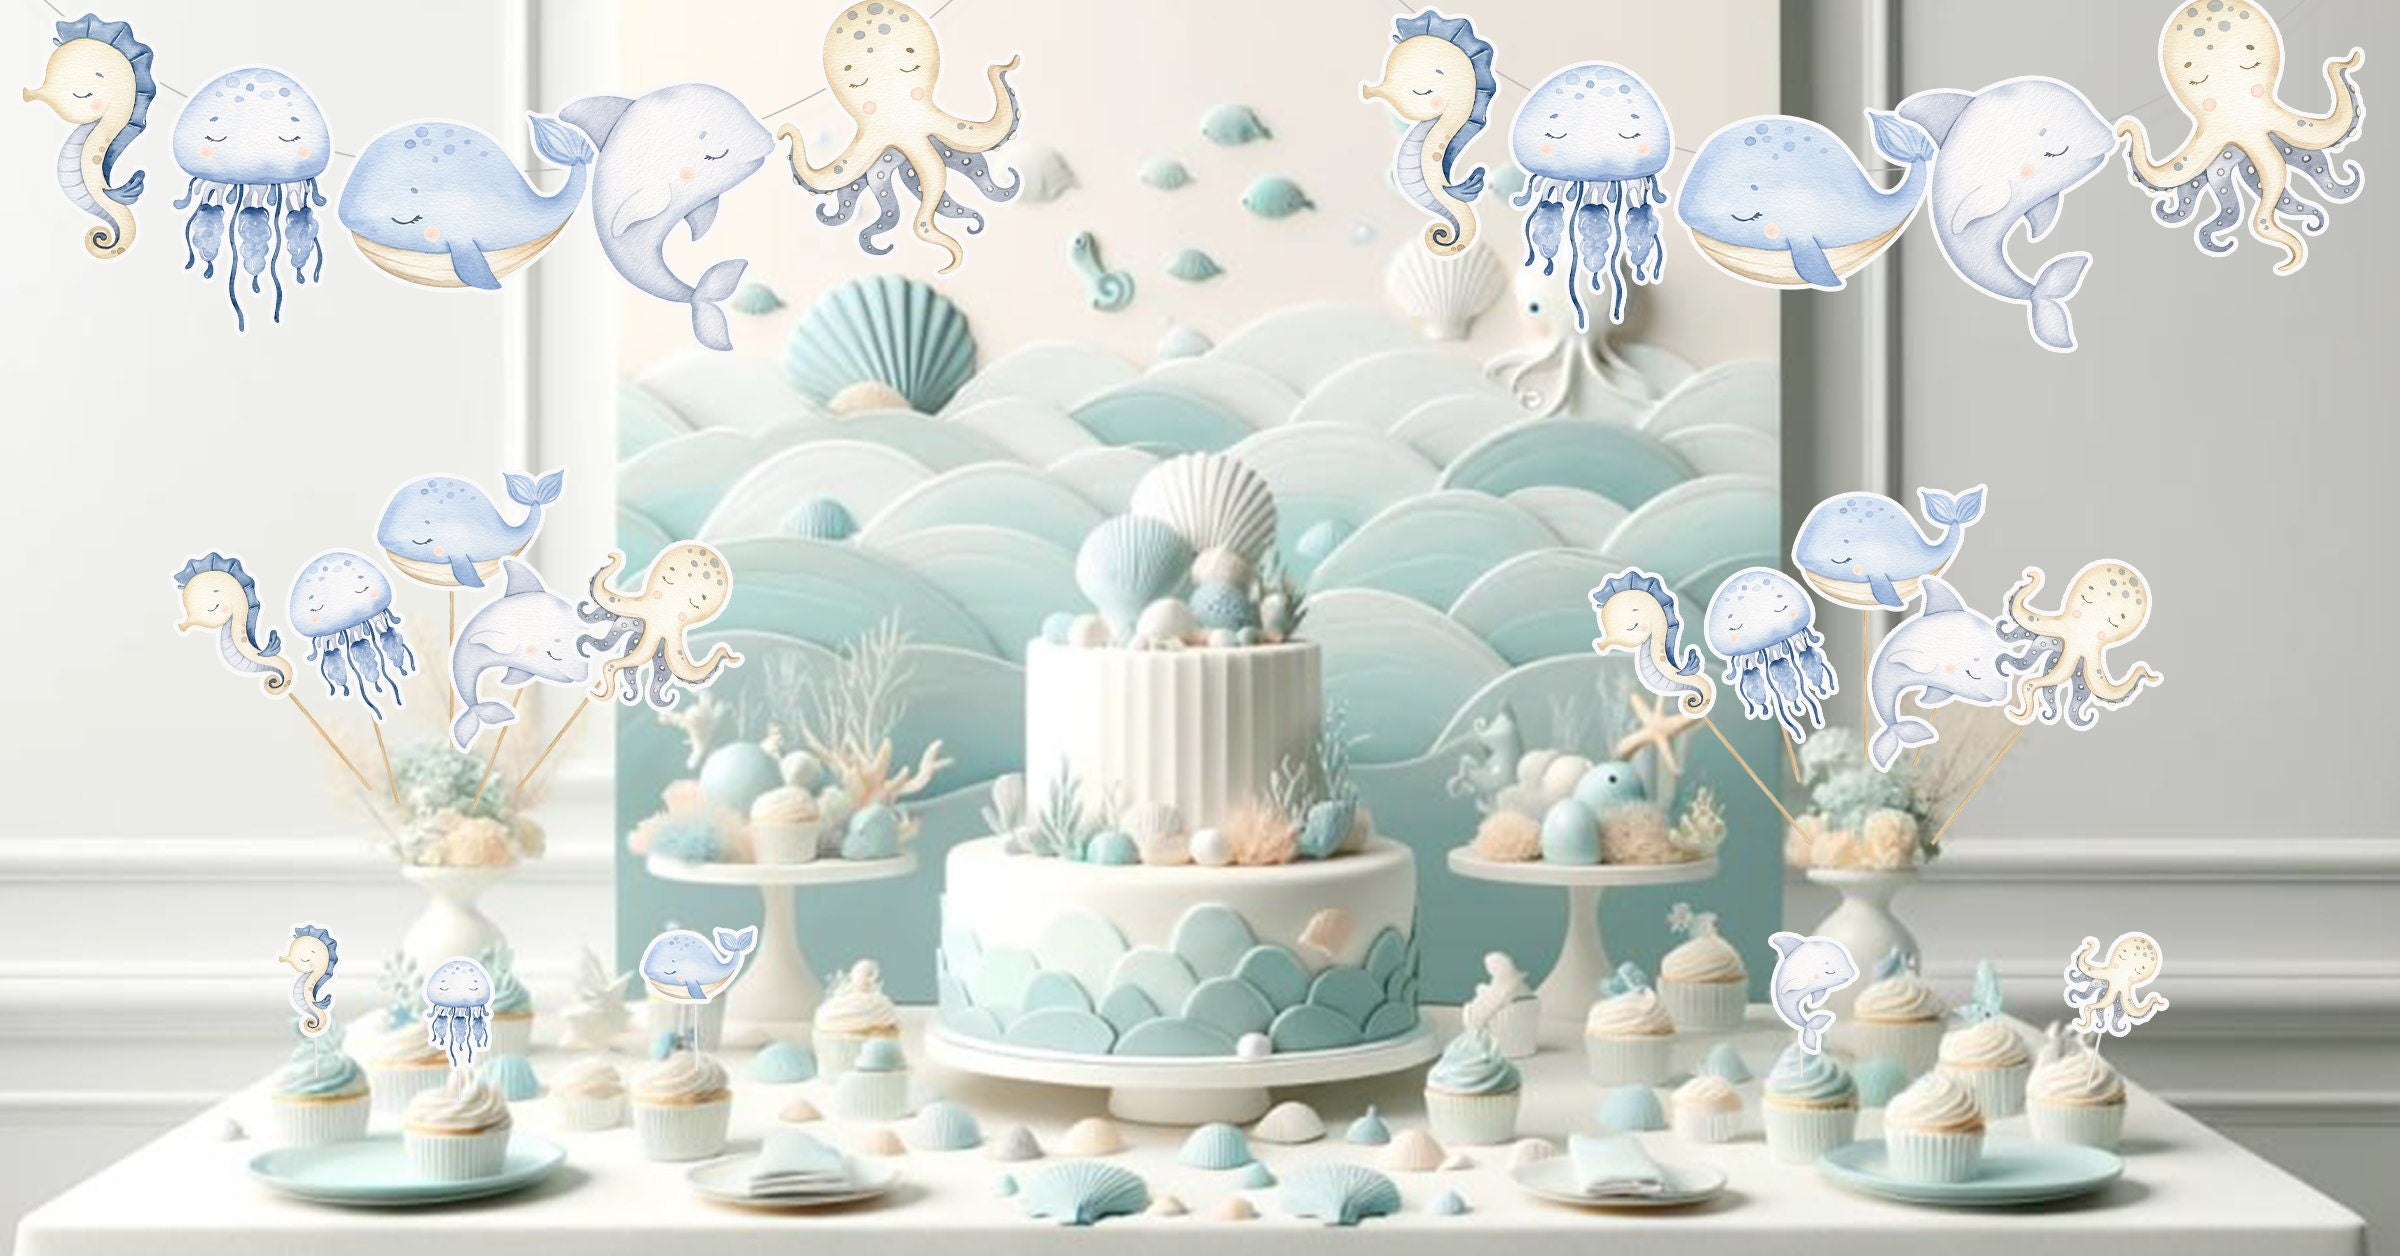 "Under the Sea Baby Shower" Backdrop 5x3 FT - Ocean Life Themed Party Decor